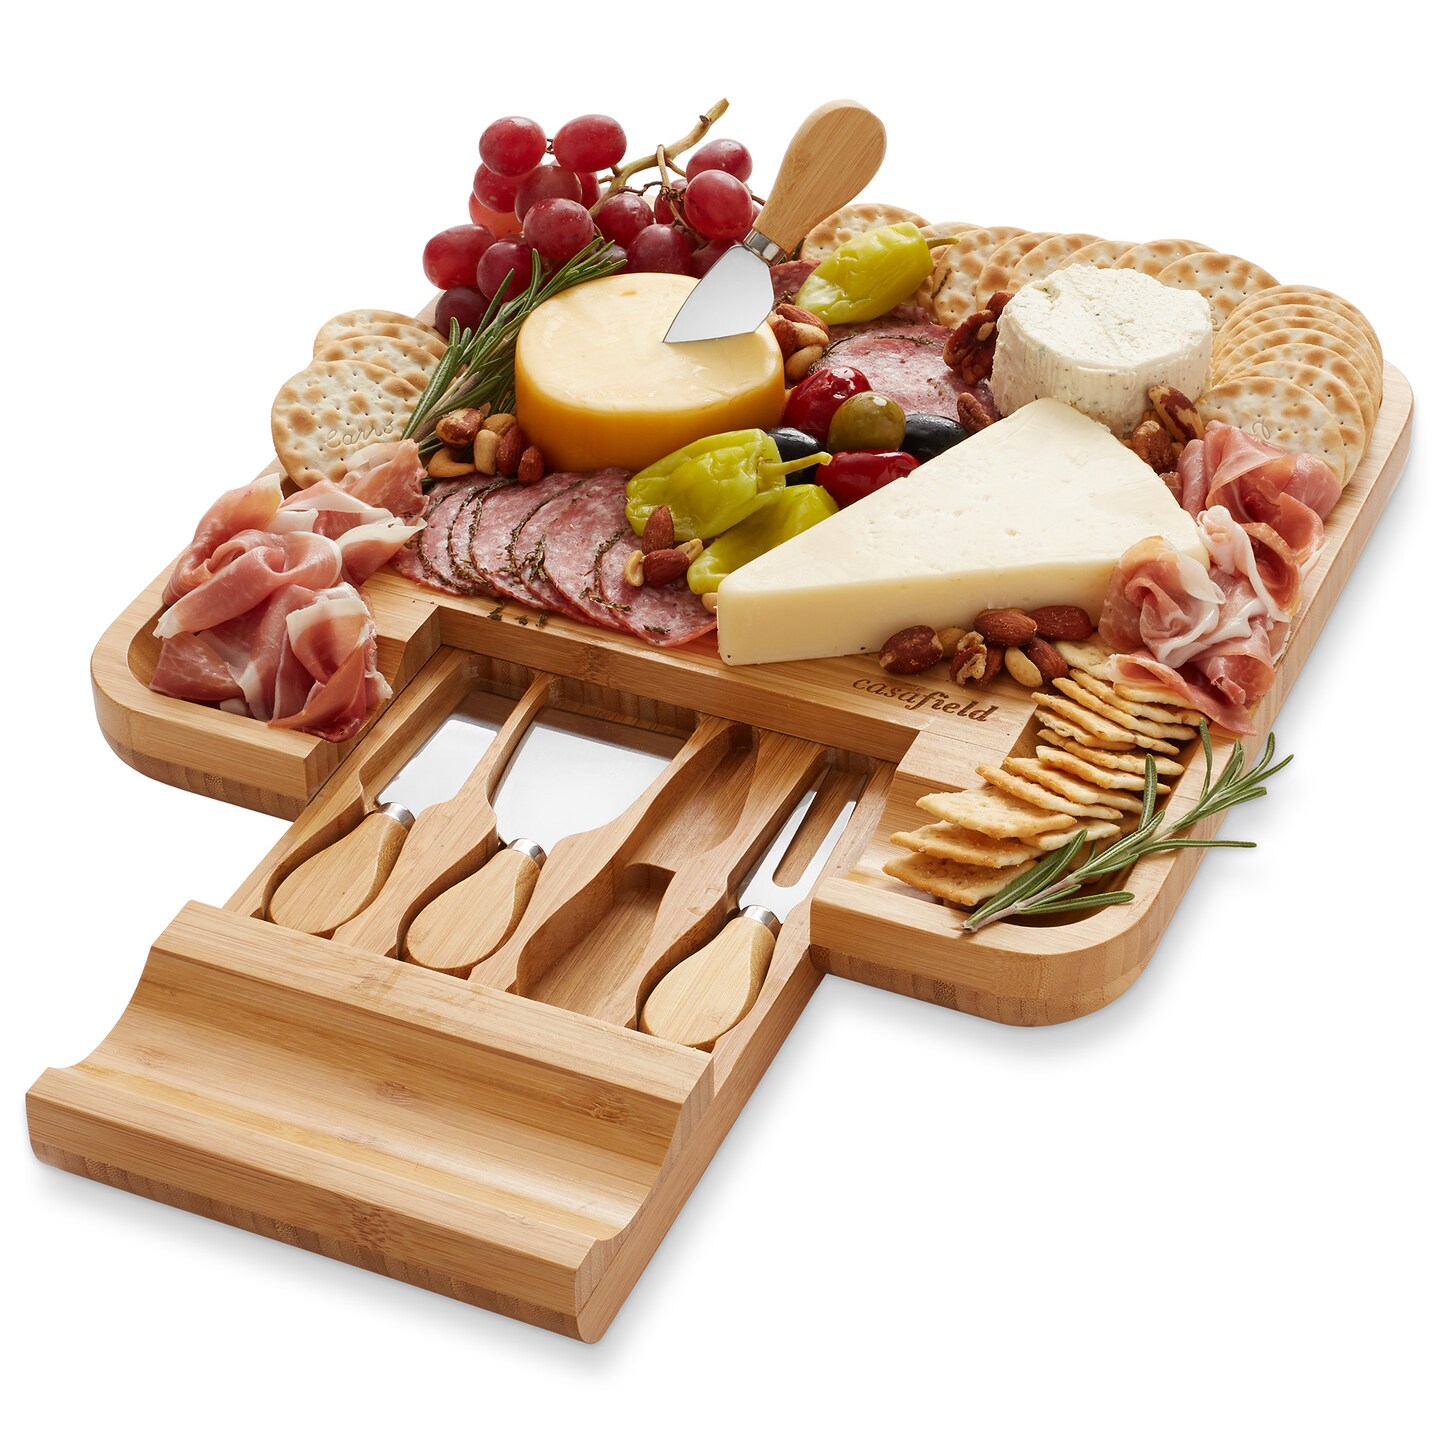 Casafield Organic Bamboo Cheese Cutting Board &#x26; Knife Gift Set - Wooden Serving Tray for Charcuterie Meat Platter, Fruit &#x26; Crackers - Slide Out Drawer with 4 Stainless Steel Knives